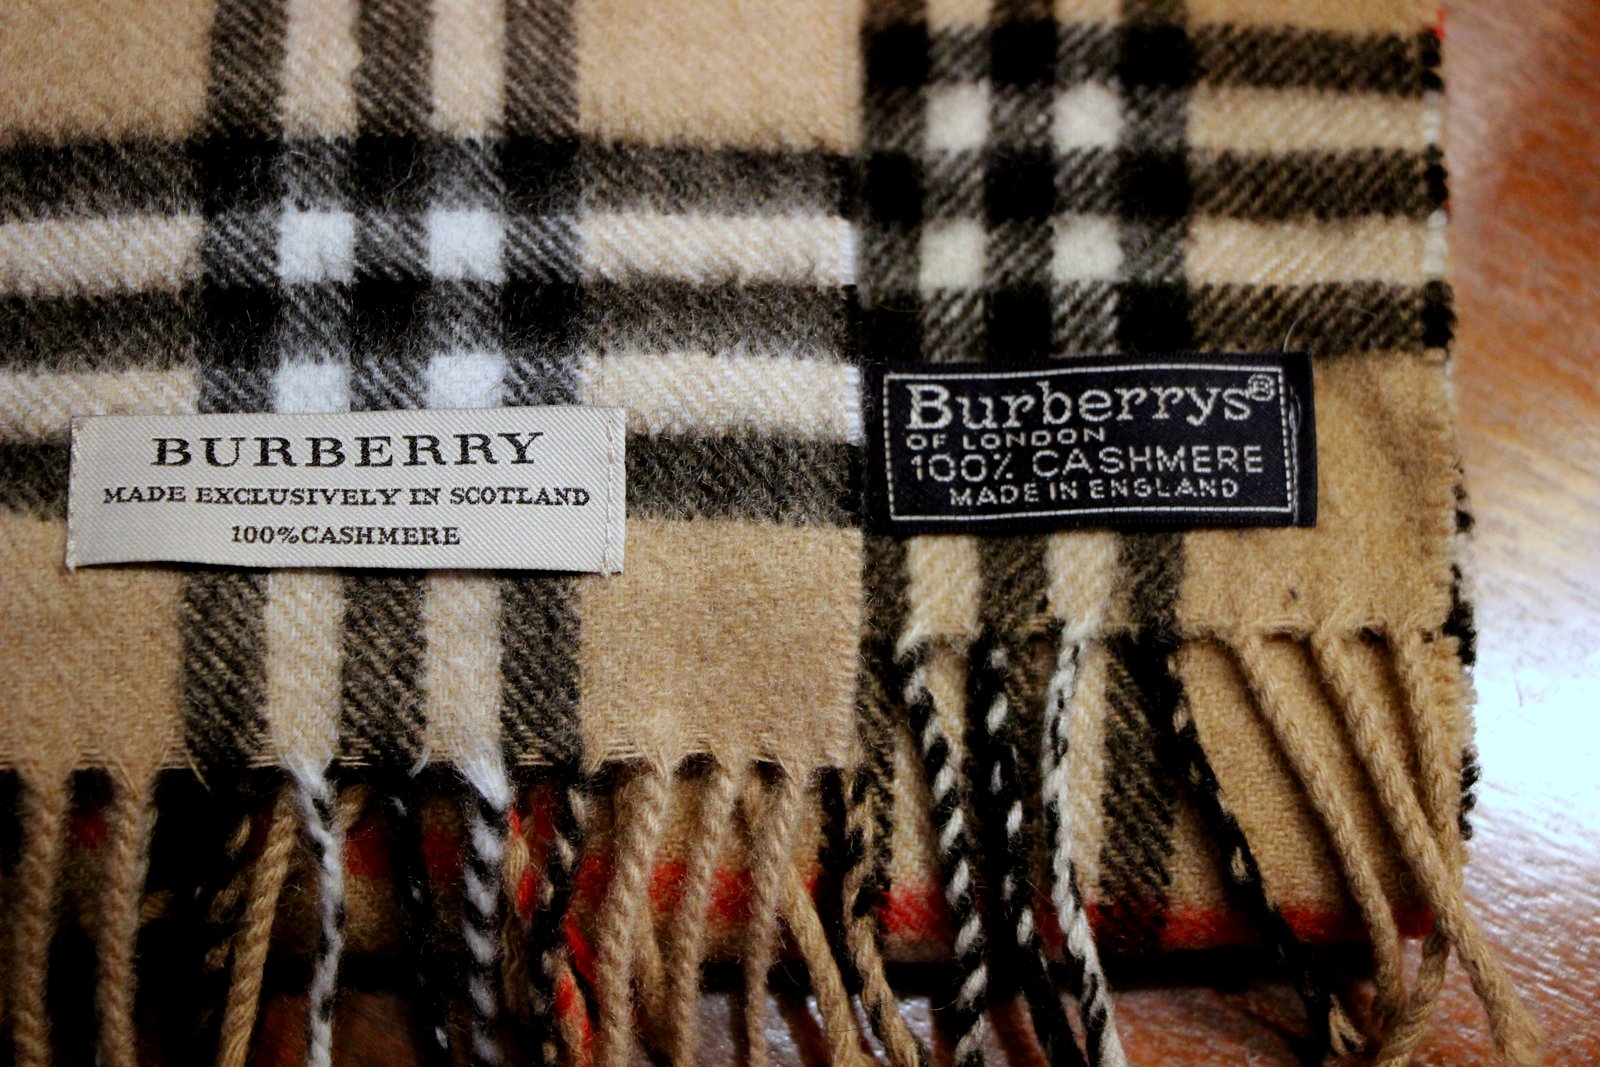 burberry made in london